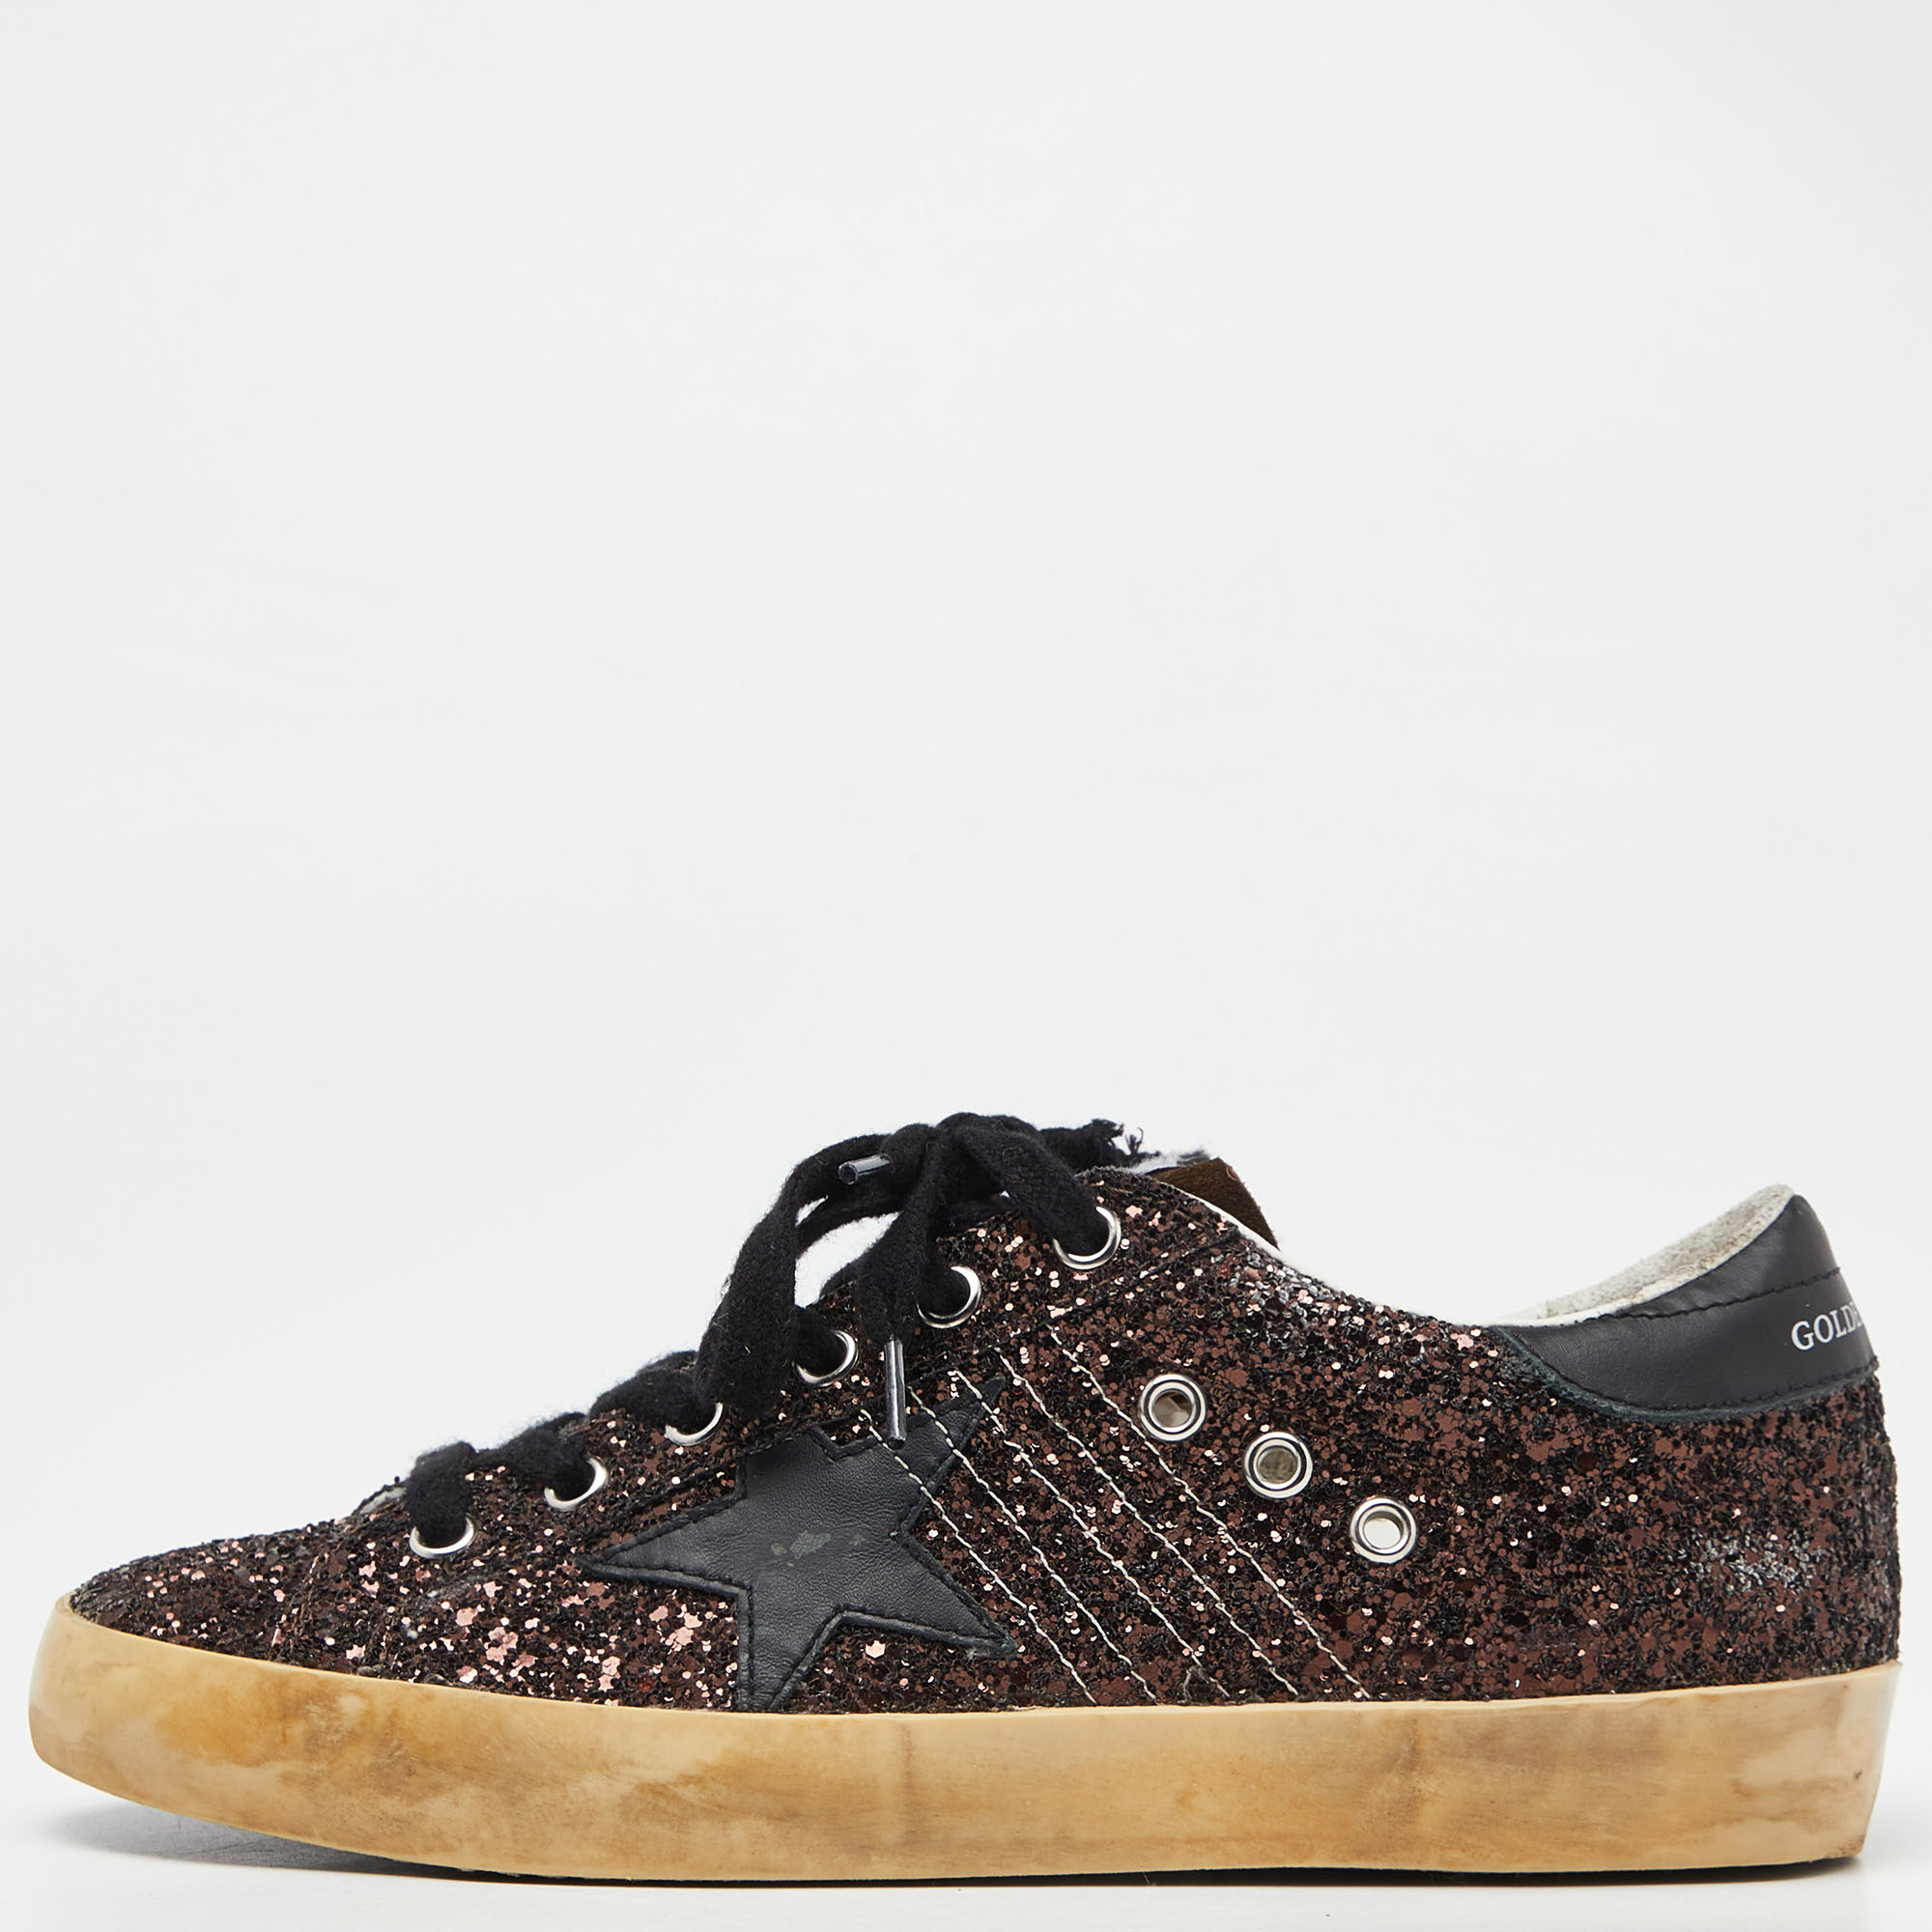 Golden goose black/brown glitter and leather superstar low top sneakers size 38